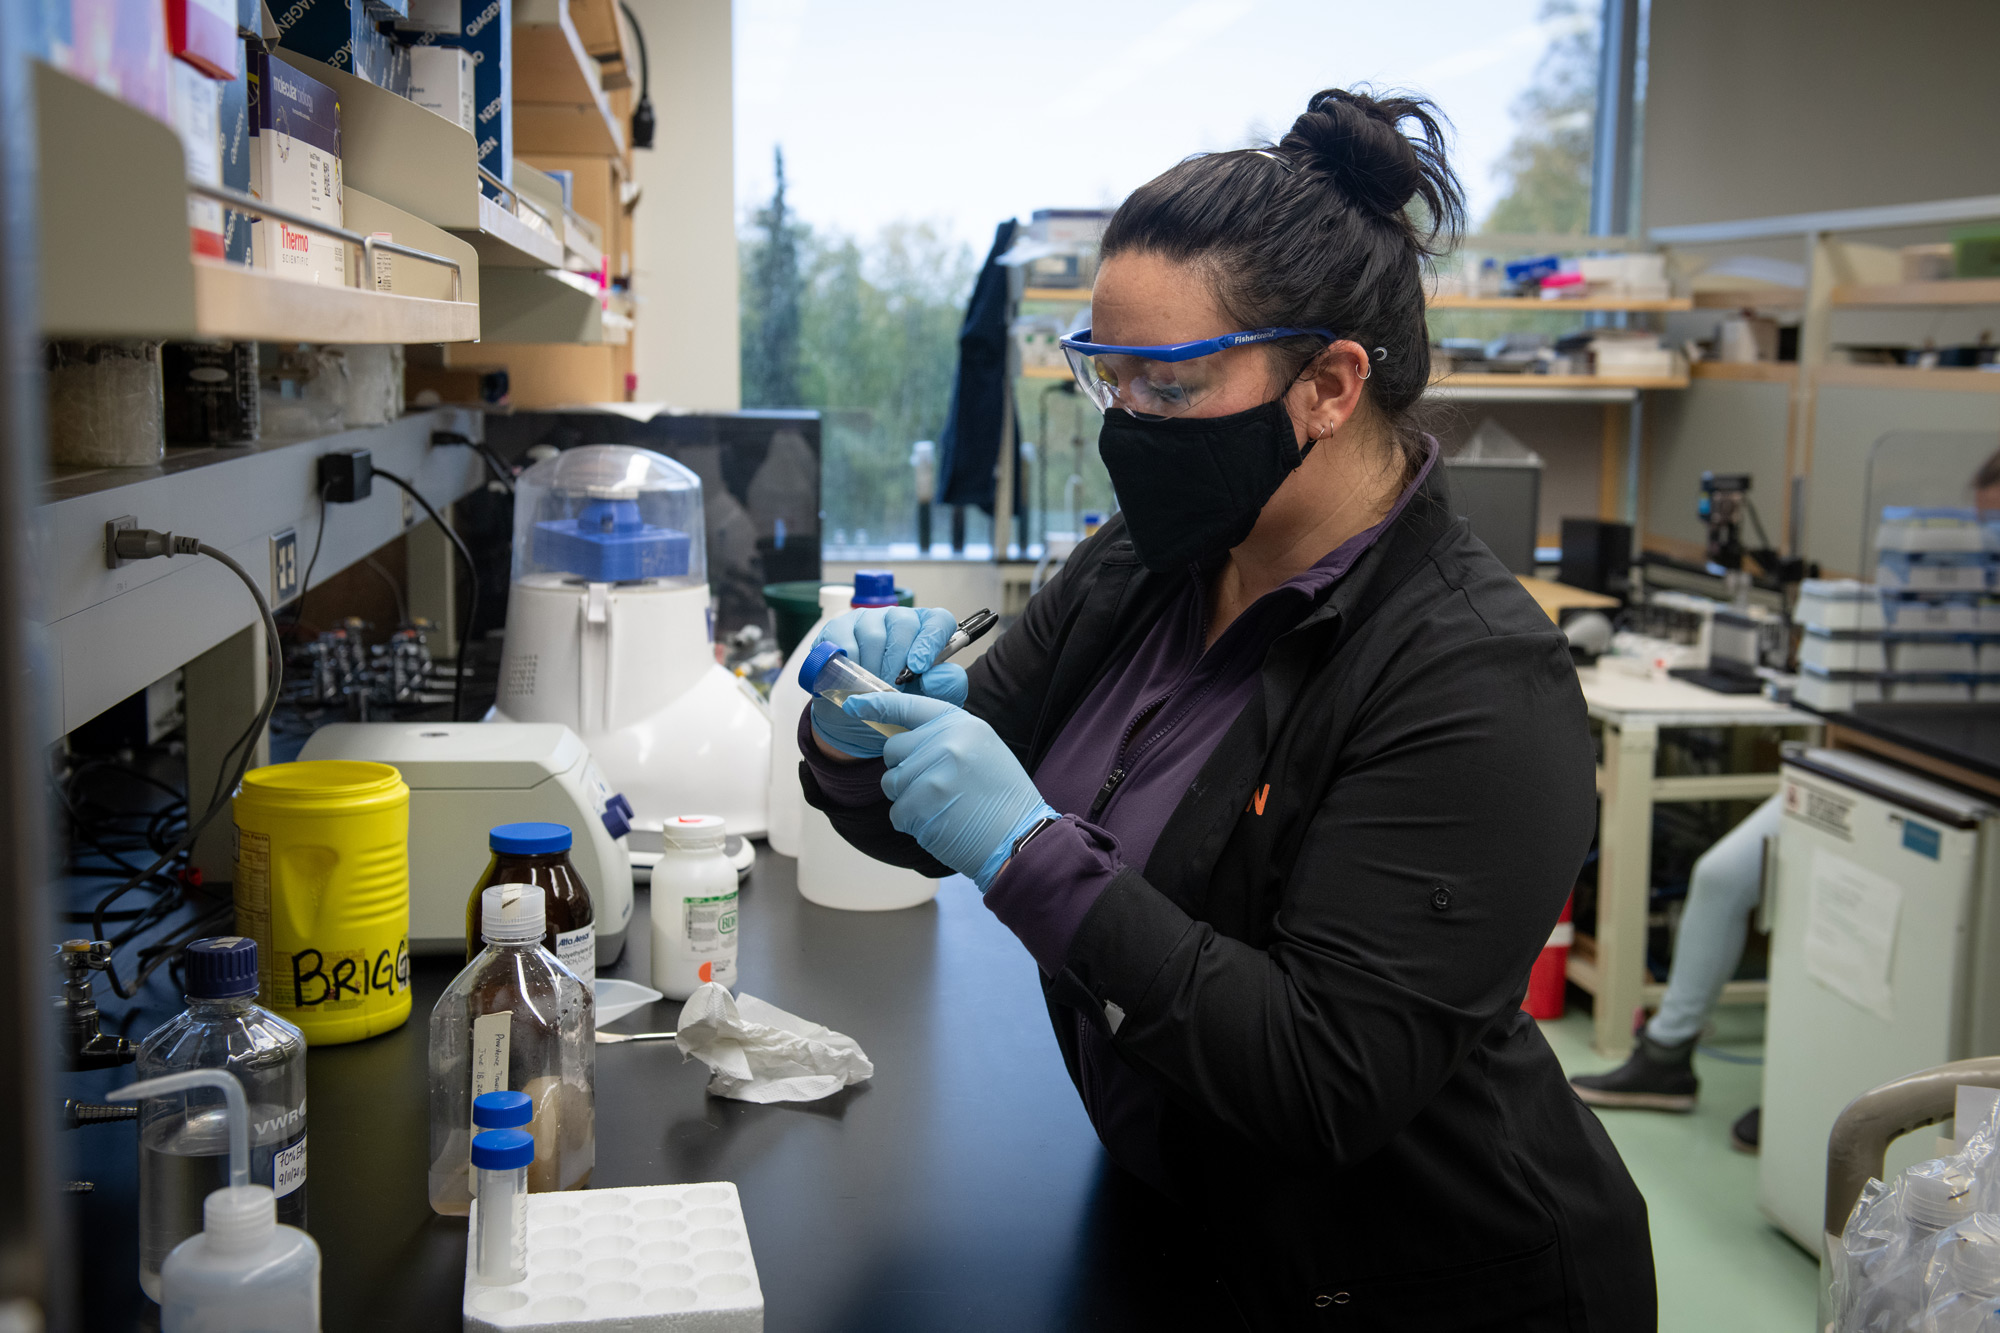 Biology and Natural Sciences Senior Kodi Haughn prepares samples of wastewater for COVID-19 testing in Professor Brandon Briggs' lab in UAA's ConocoPhillips Integrated Science Building.